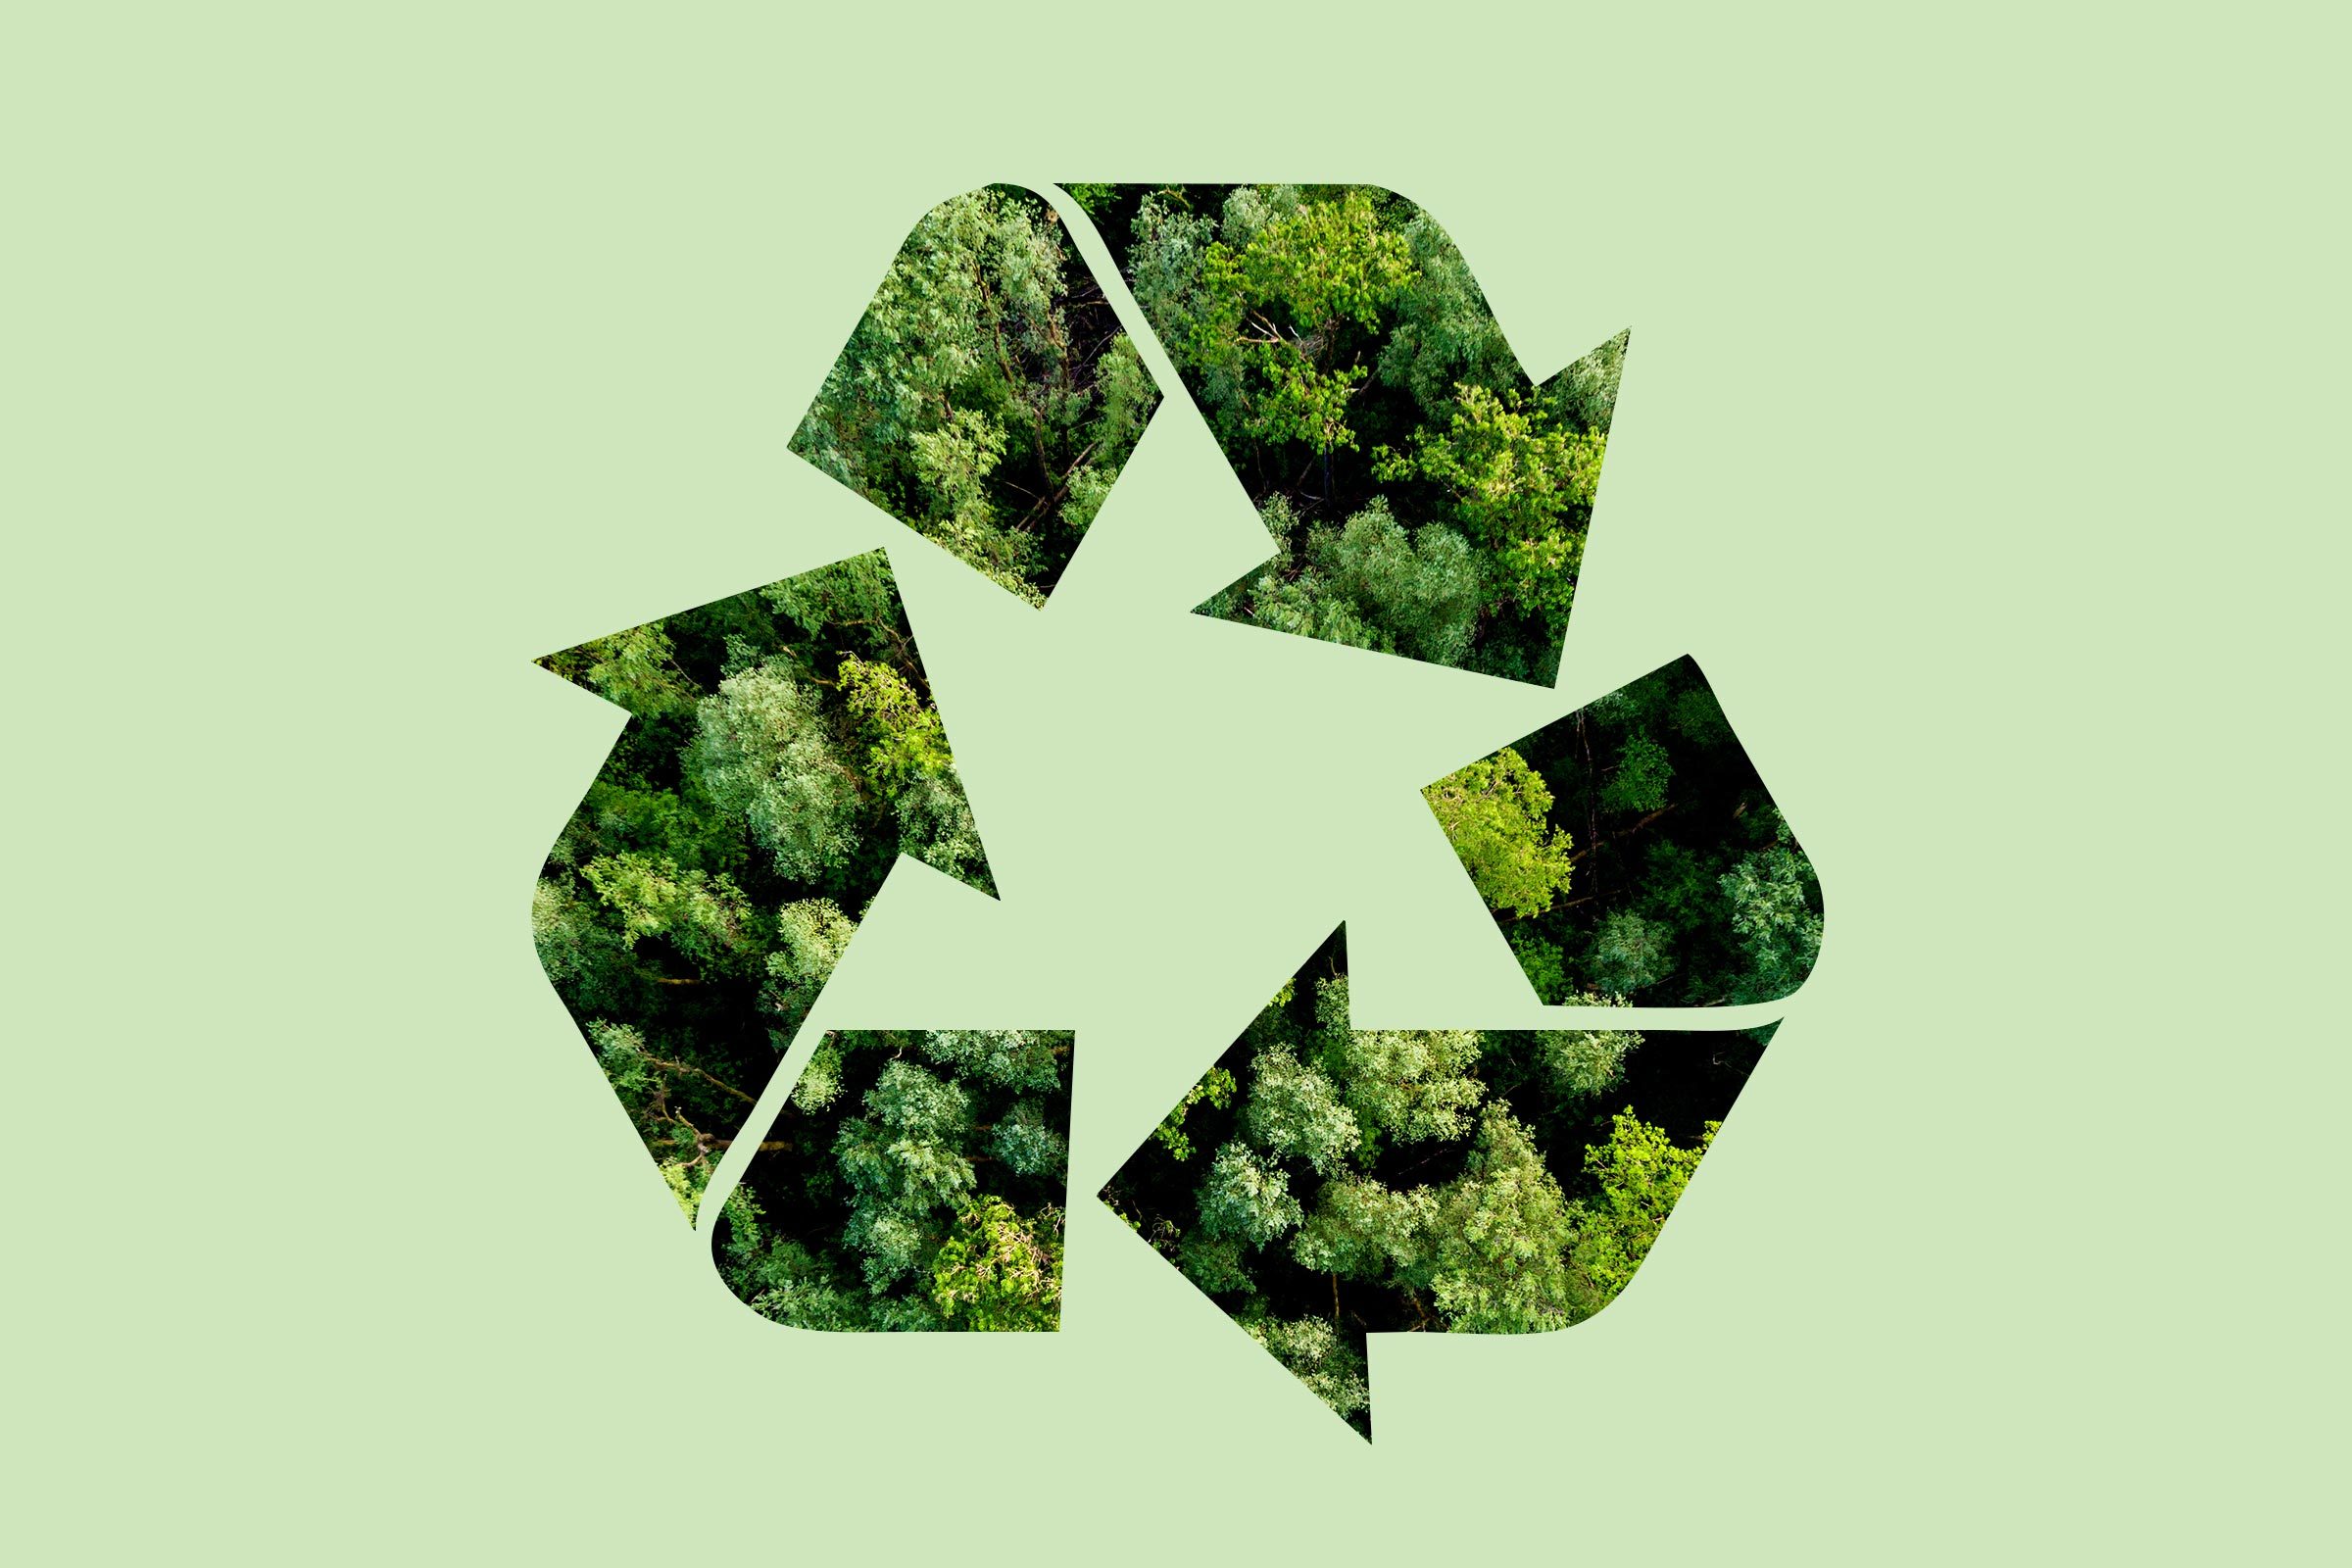 green trees n a recycle symbol on a green background